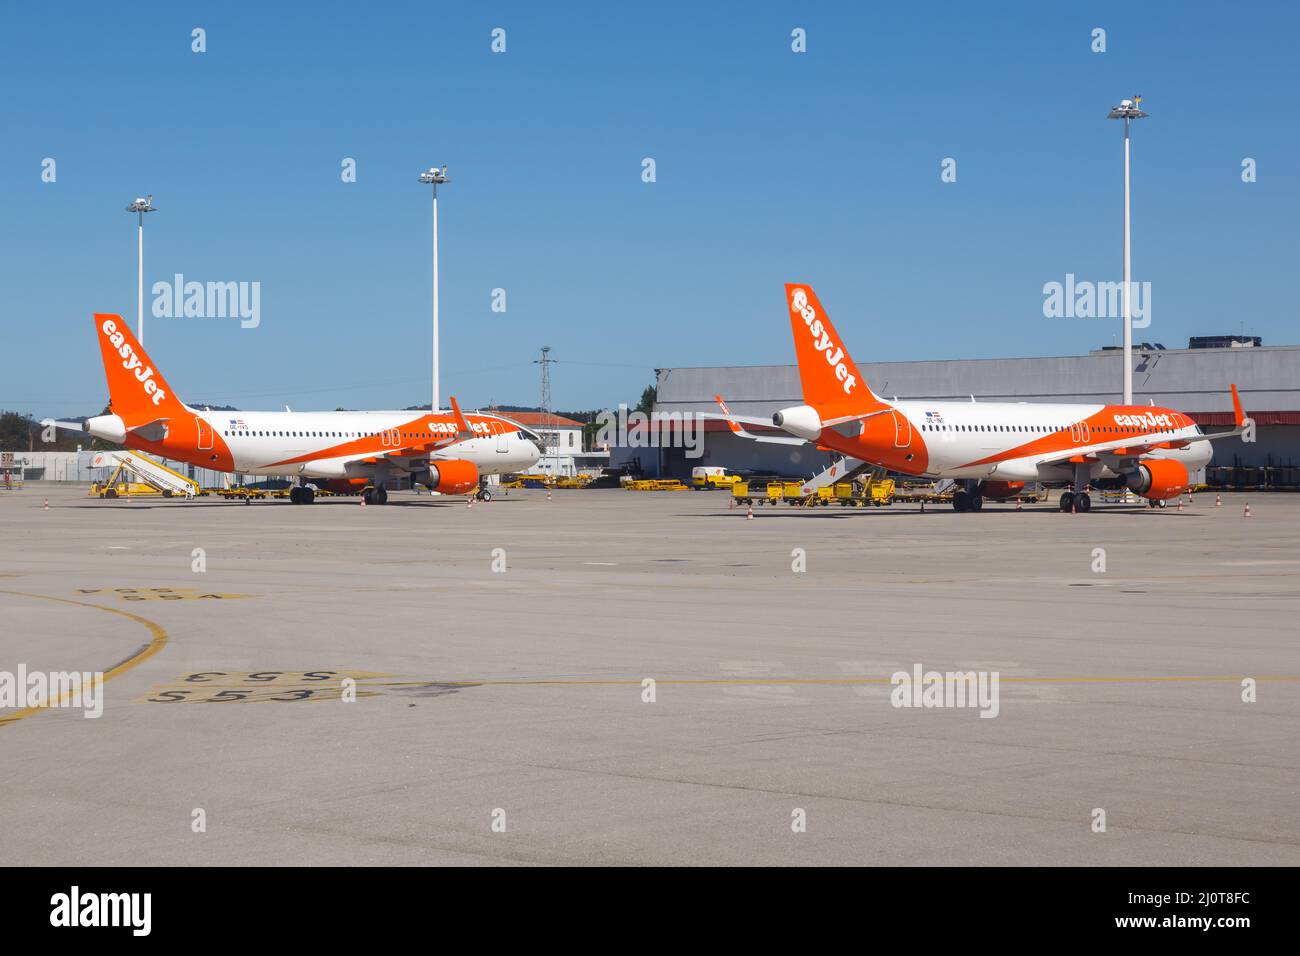 EasyJet Airbus A320 aircraft Porto airport in Portugal Stock Photo - Alamy